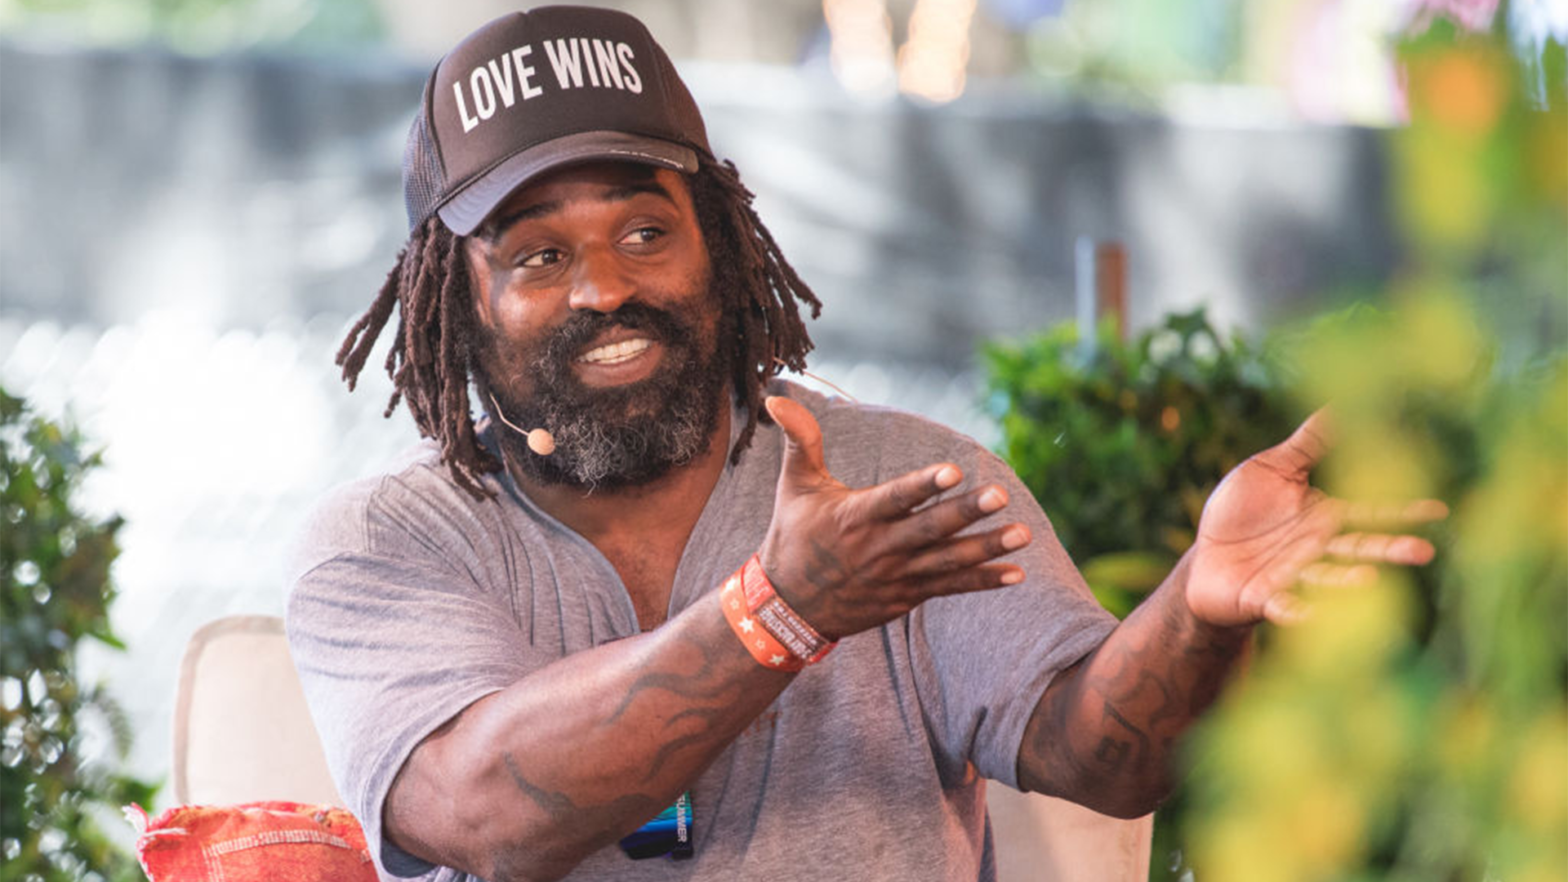 Former NFL Player Ricky Williams Looks To Expand His Cannabis Brand Into A Sports Bar Concept